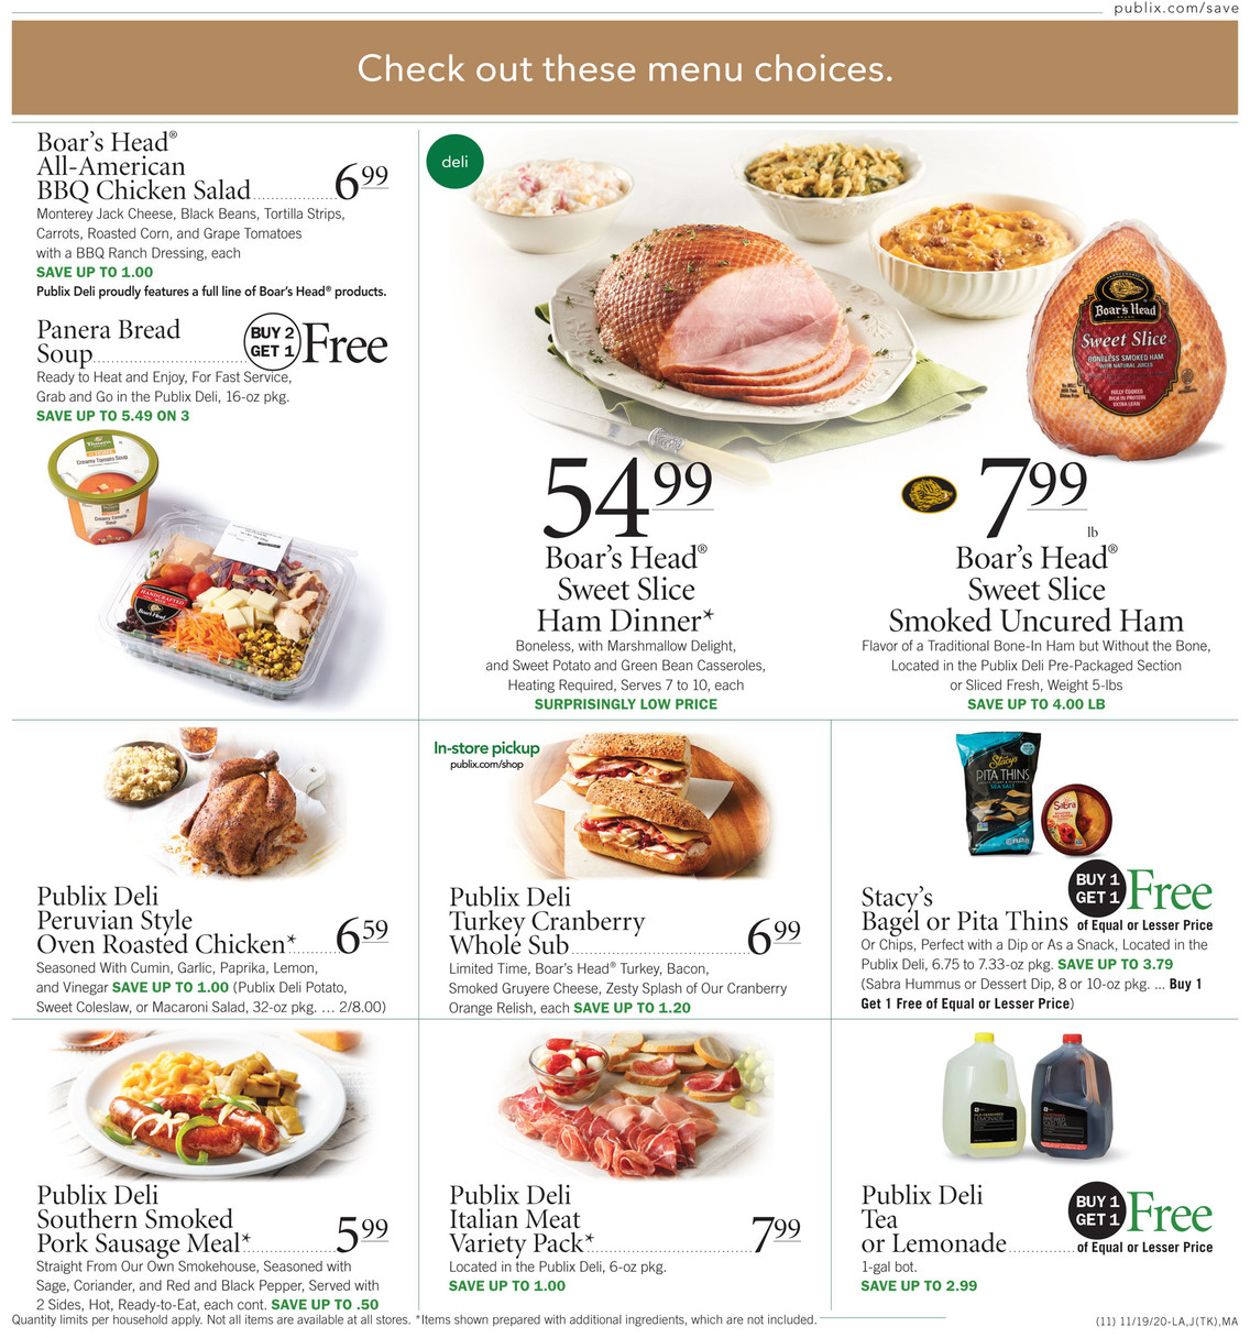 Publix Christmas Dinners : Publix Christmas Dinner Christmas Publix Super Market The Publix Checkout Are You Good At Making Traditional Dishes At New Year And Christmas Dewi Ilmu